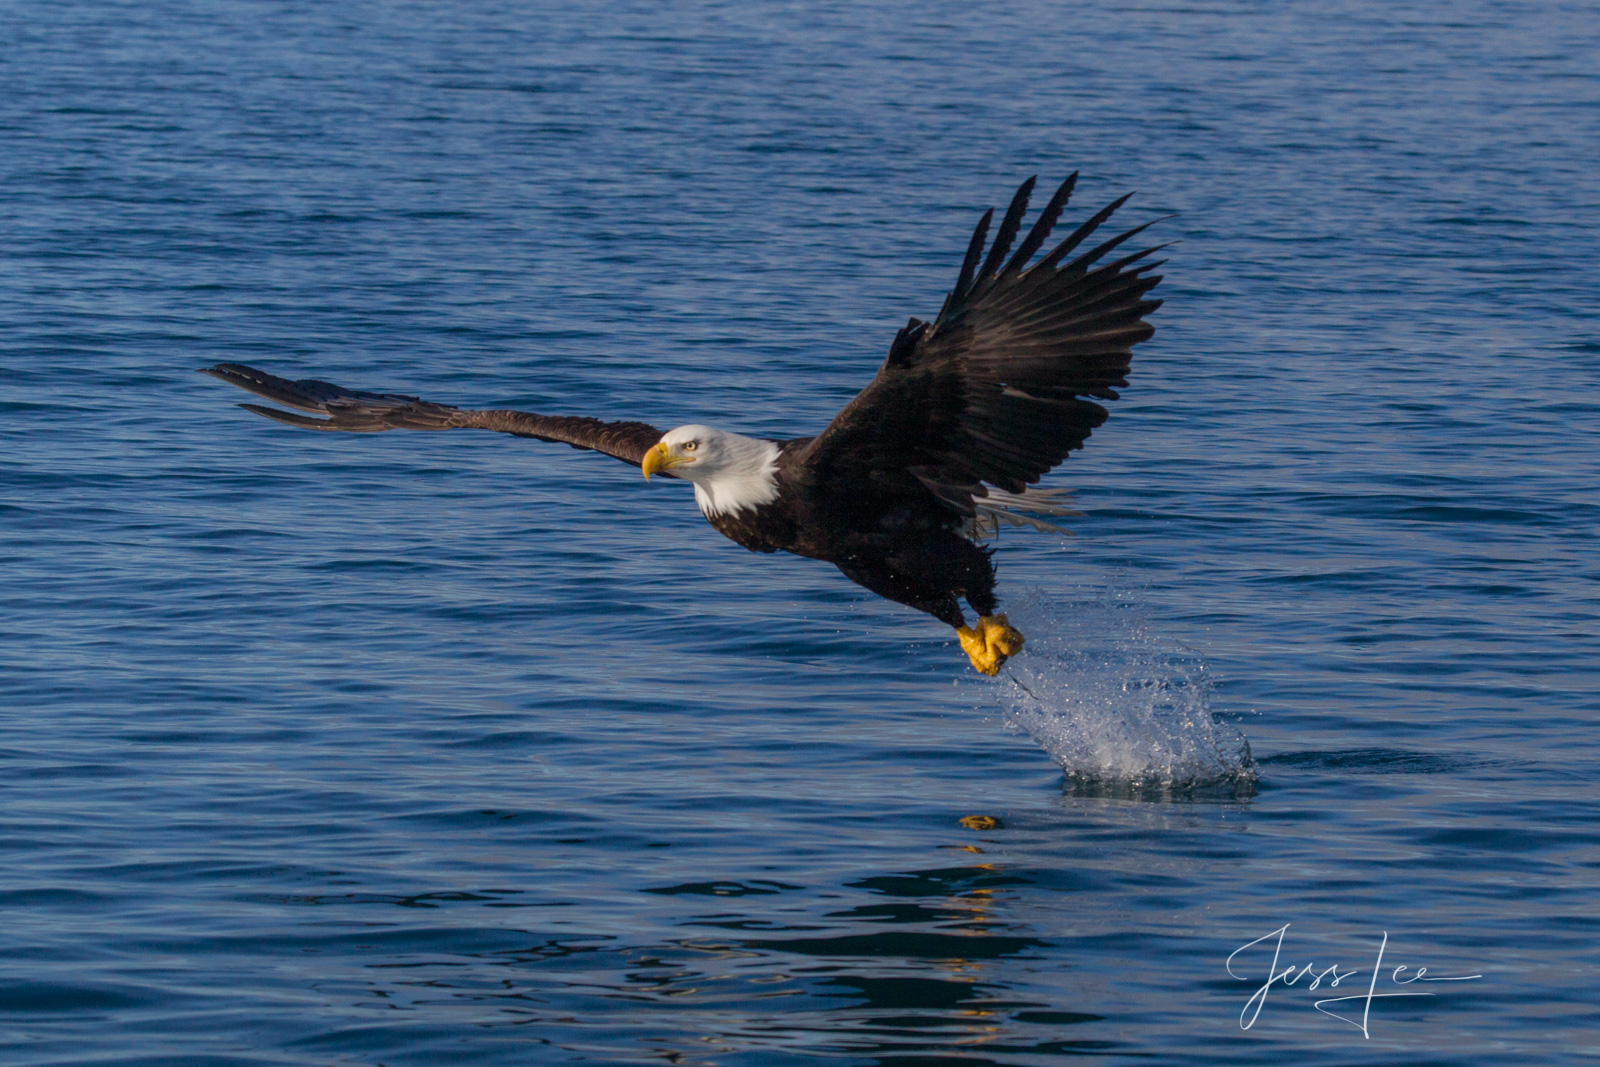 Bring home the power and beauty of the amazing fine art American Bald Eagle photograph Miss or hit? by Jess Lee from his Wildlife...